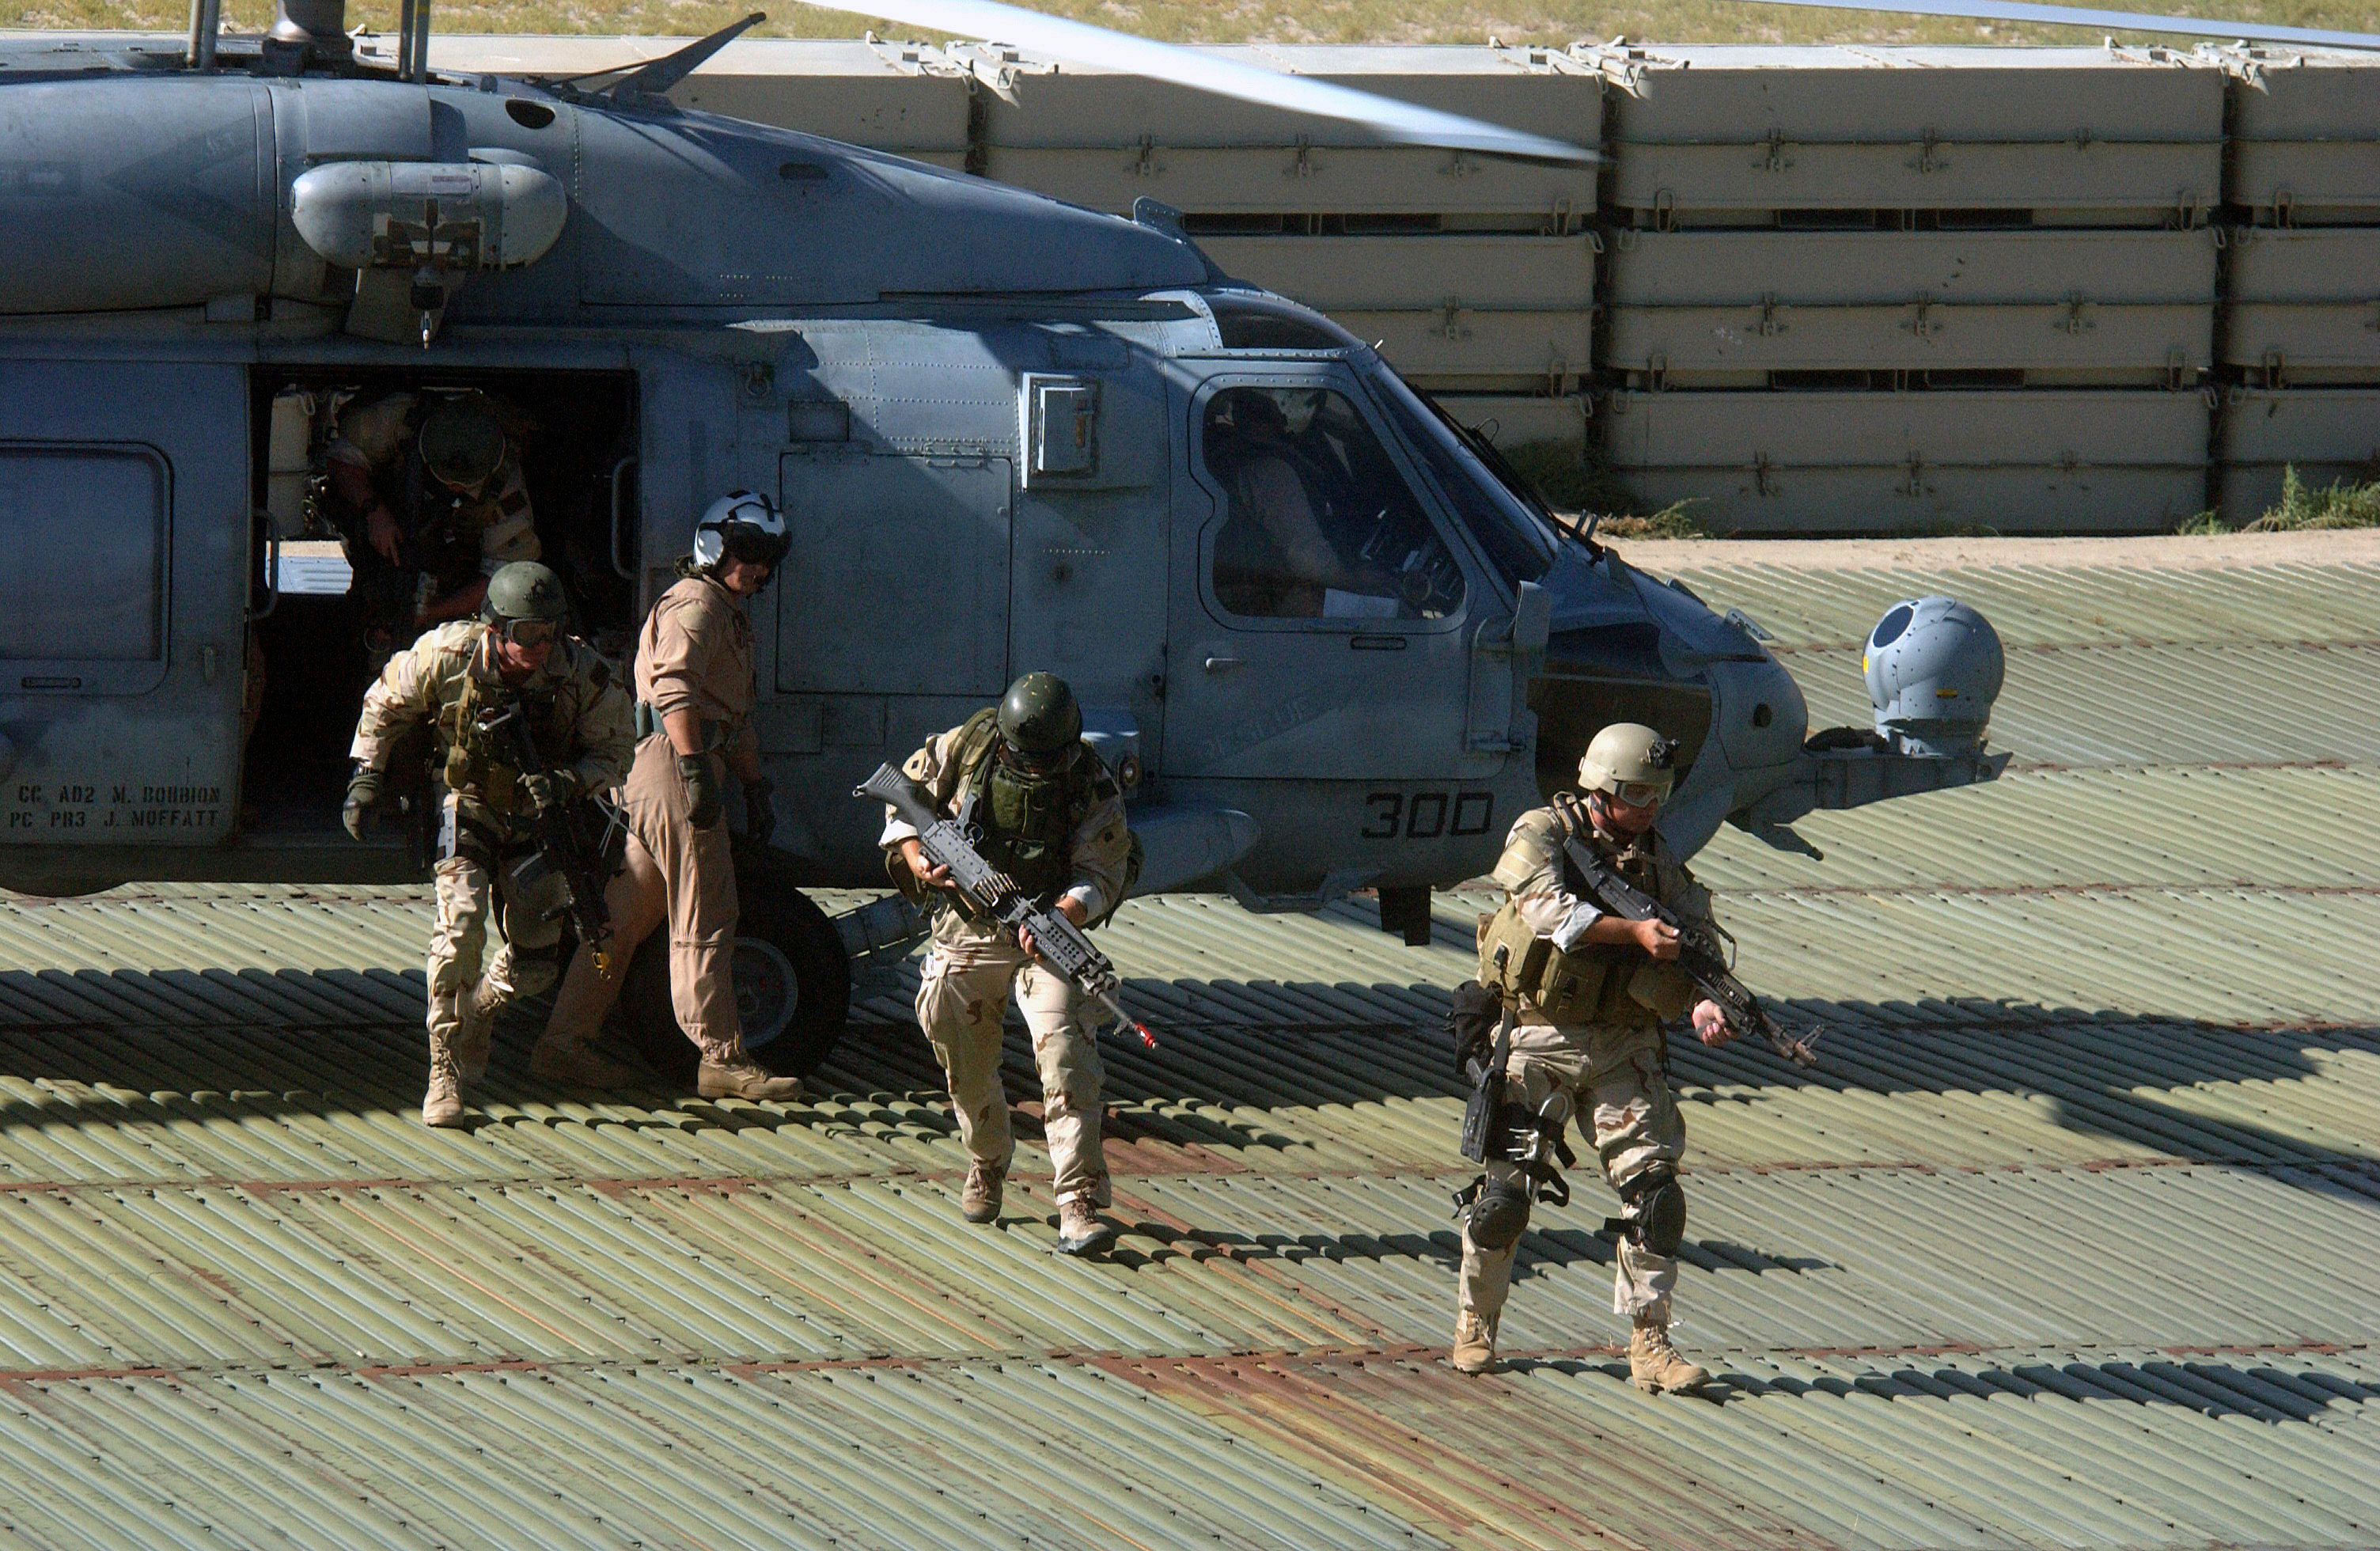 SEALs Disembarking From Seahawk Helicopter - Photo